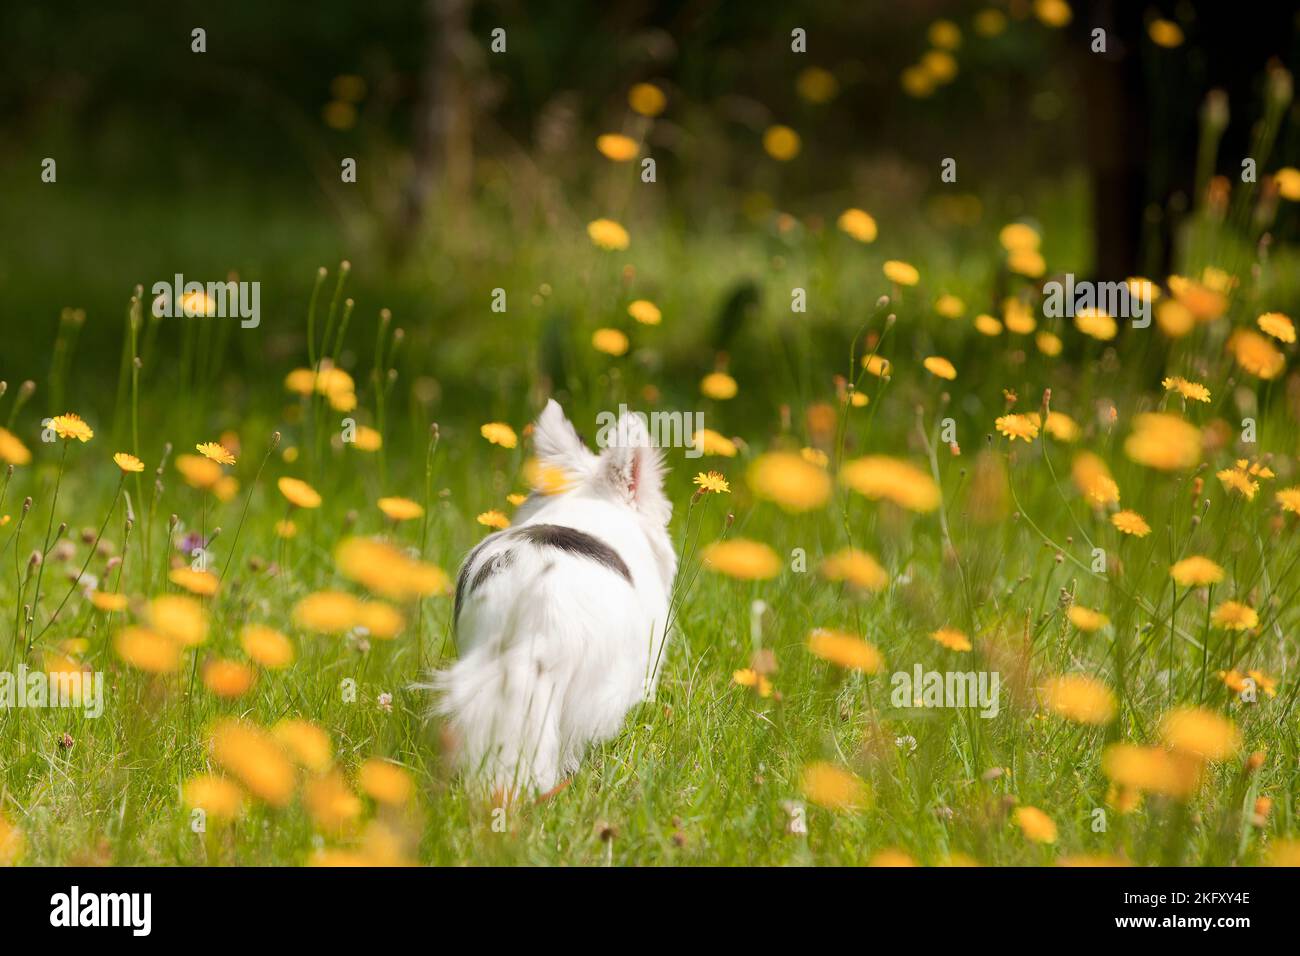 Black and white long hair chihuahua playing in the grass and dandelions in the sun. Small dog enjoying a summer day. Stock Photo